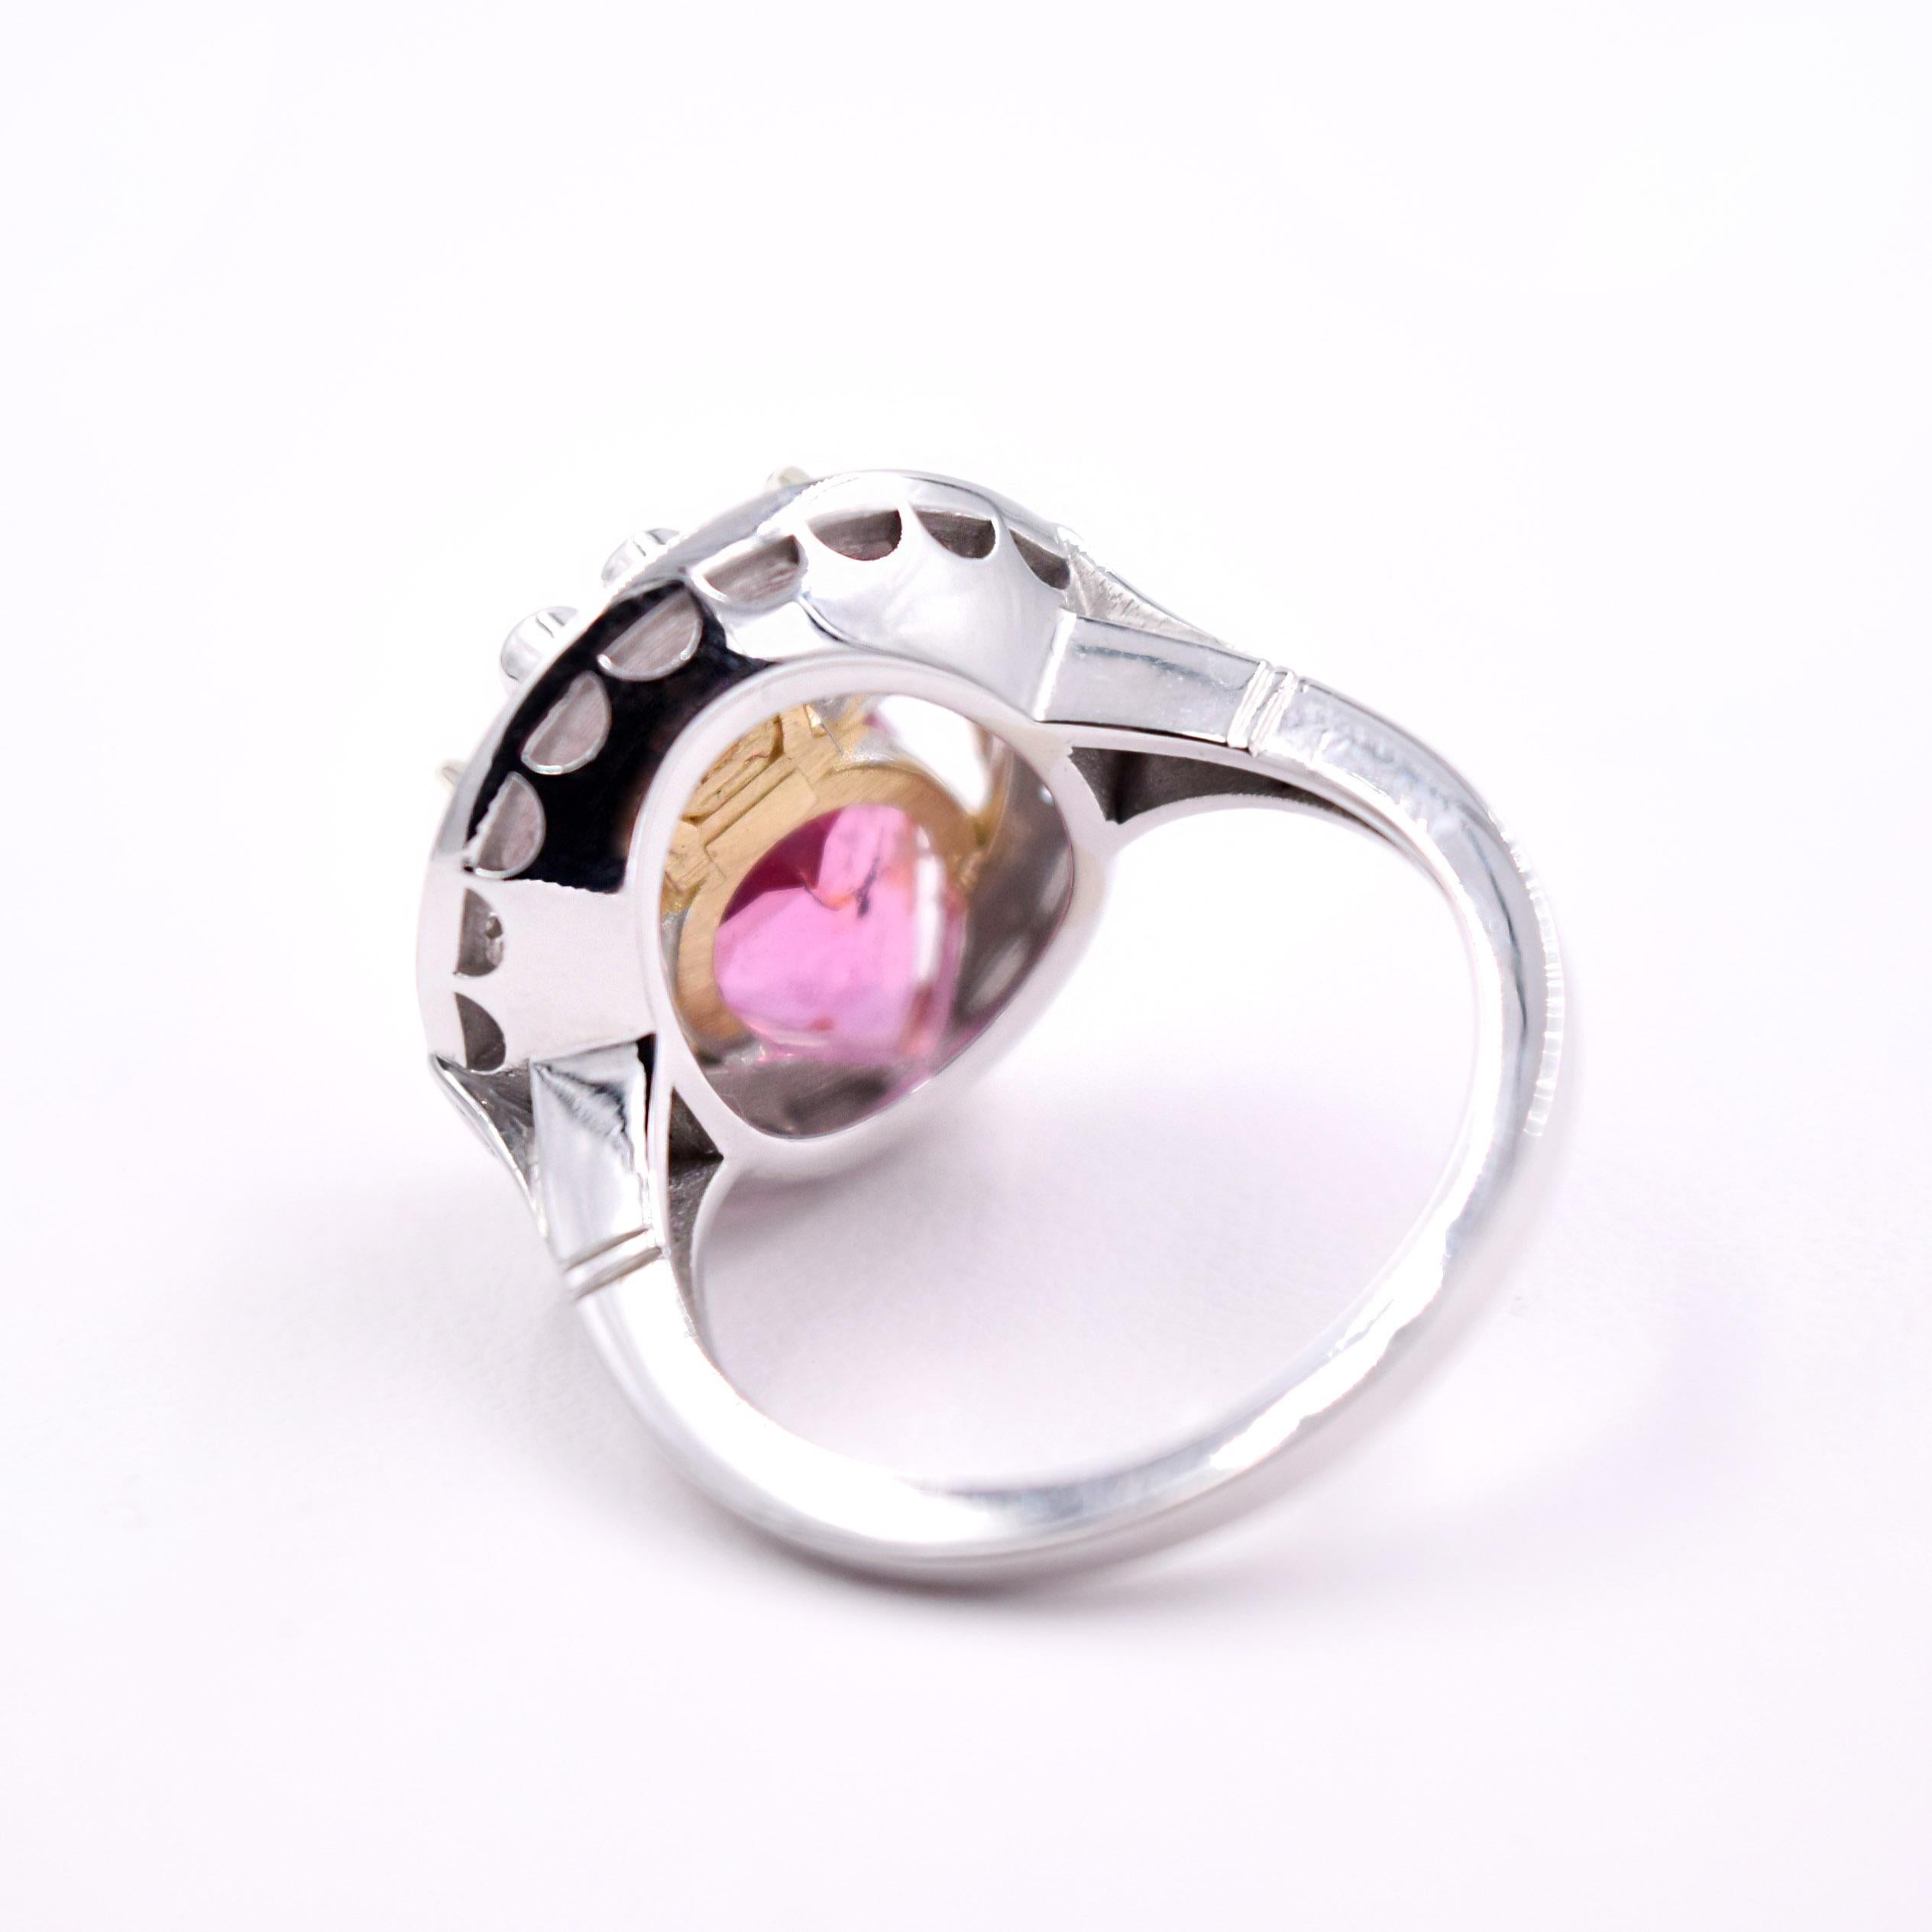 2.90 Carat Pink Tourmaline and .20 Carat Diamond Spider Ring in 14 Karat Gold In New Condition For Sale In Mill Valley, CA